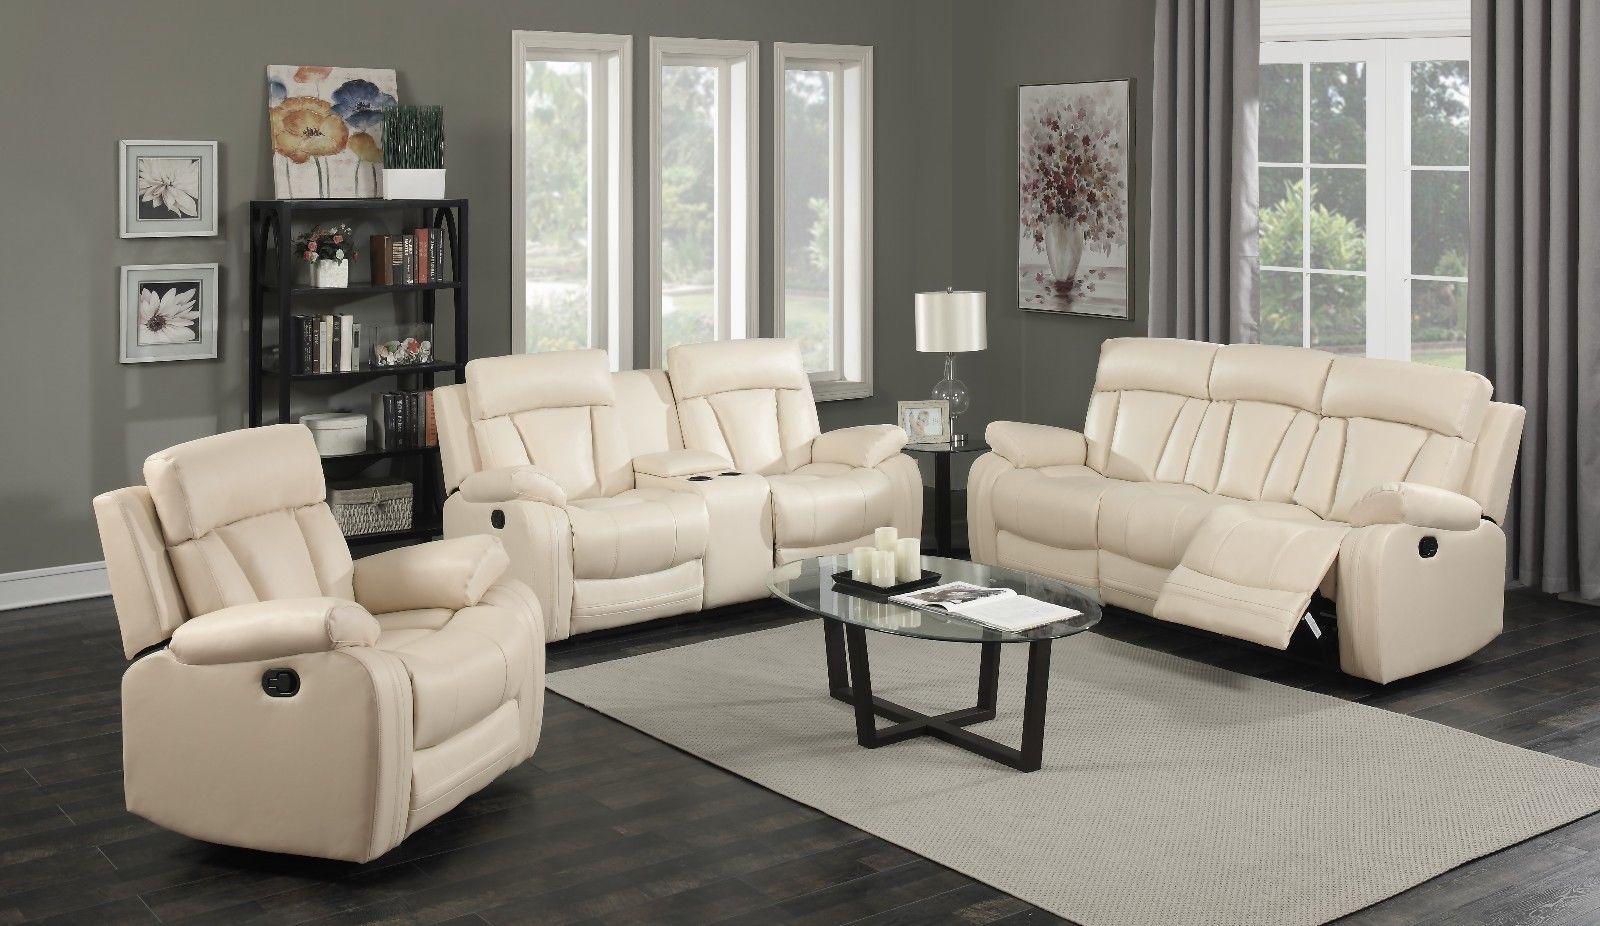 

    
Meridian 645 Avery Beige Bonded Leather Reclining Sofa Set 3Pcs Contemporary
